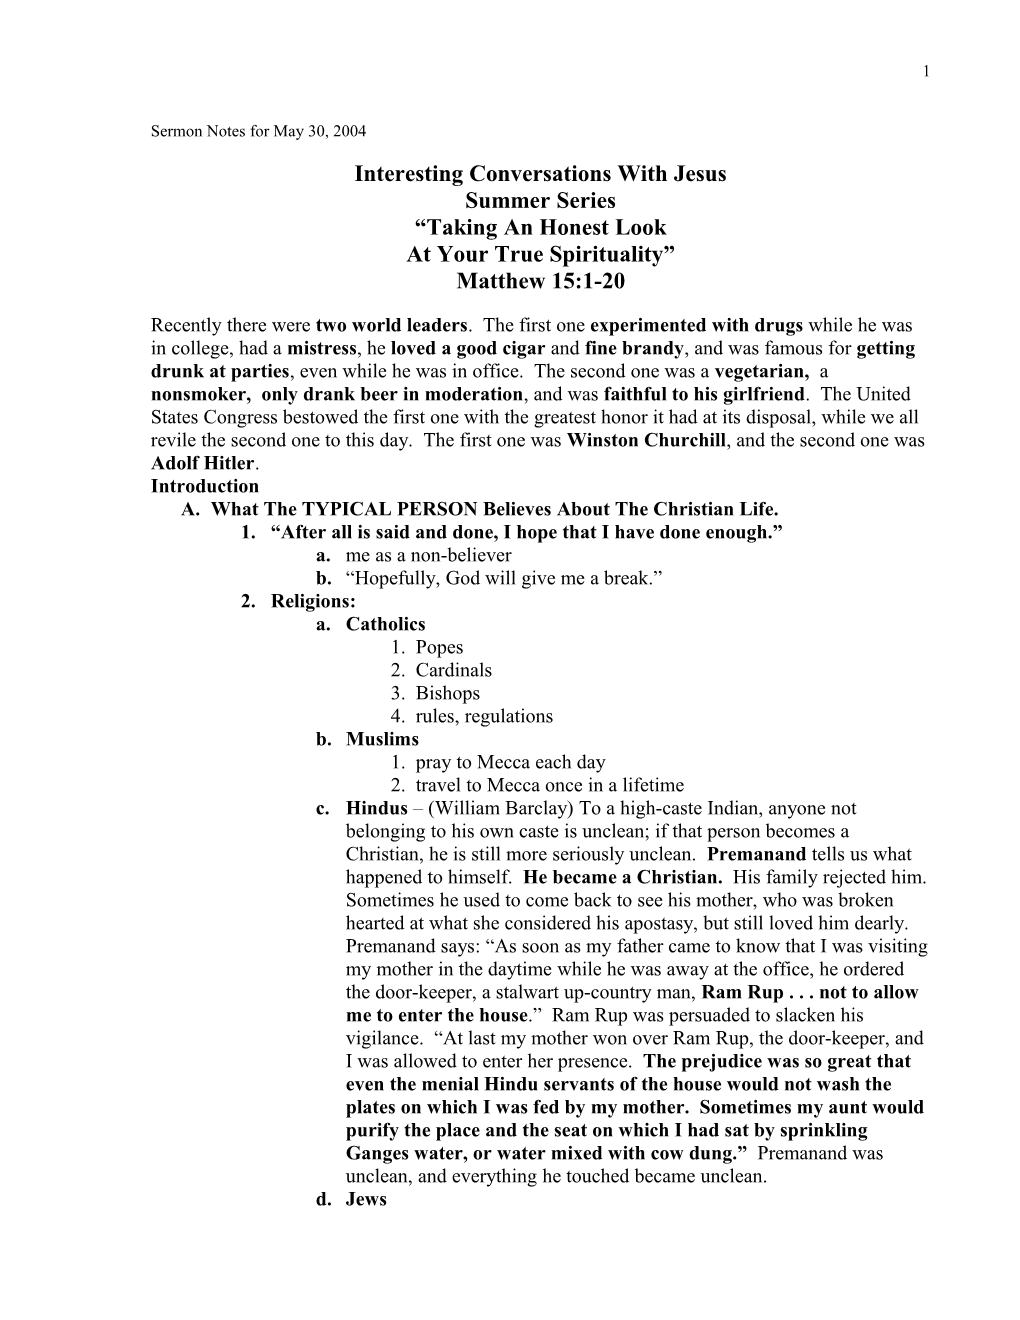 Sermon Notes for May 30, 2004